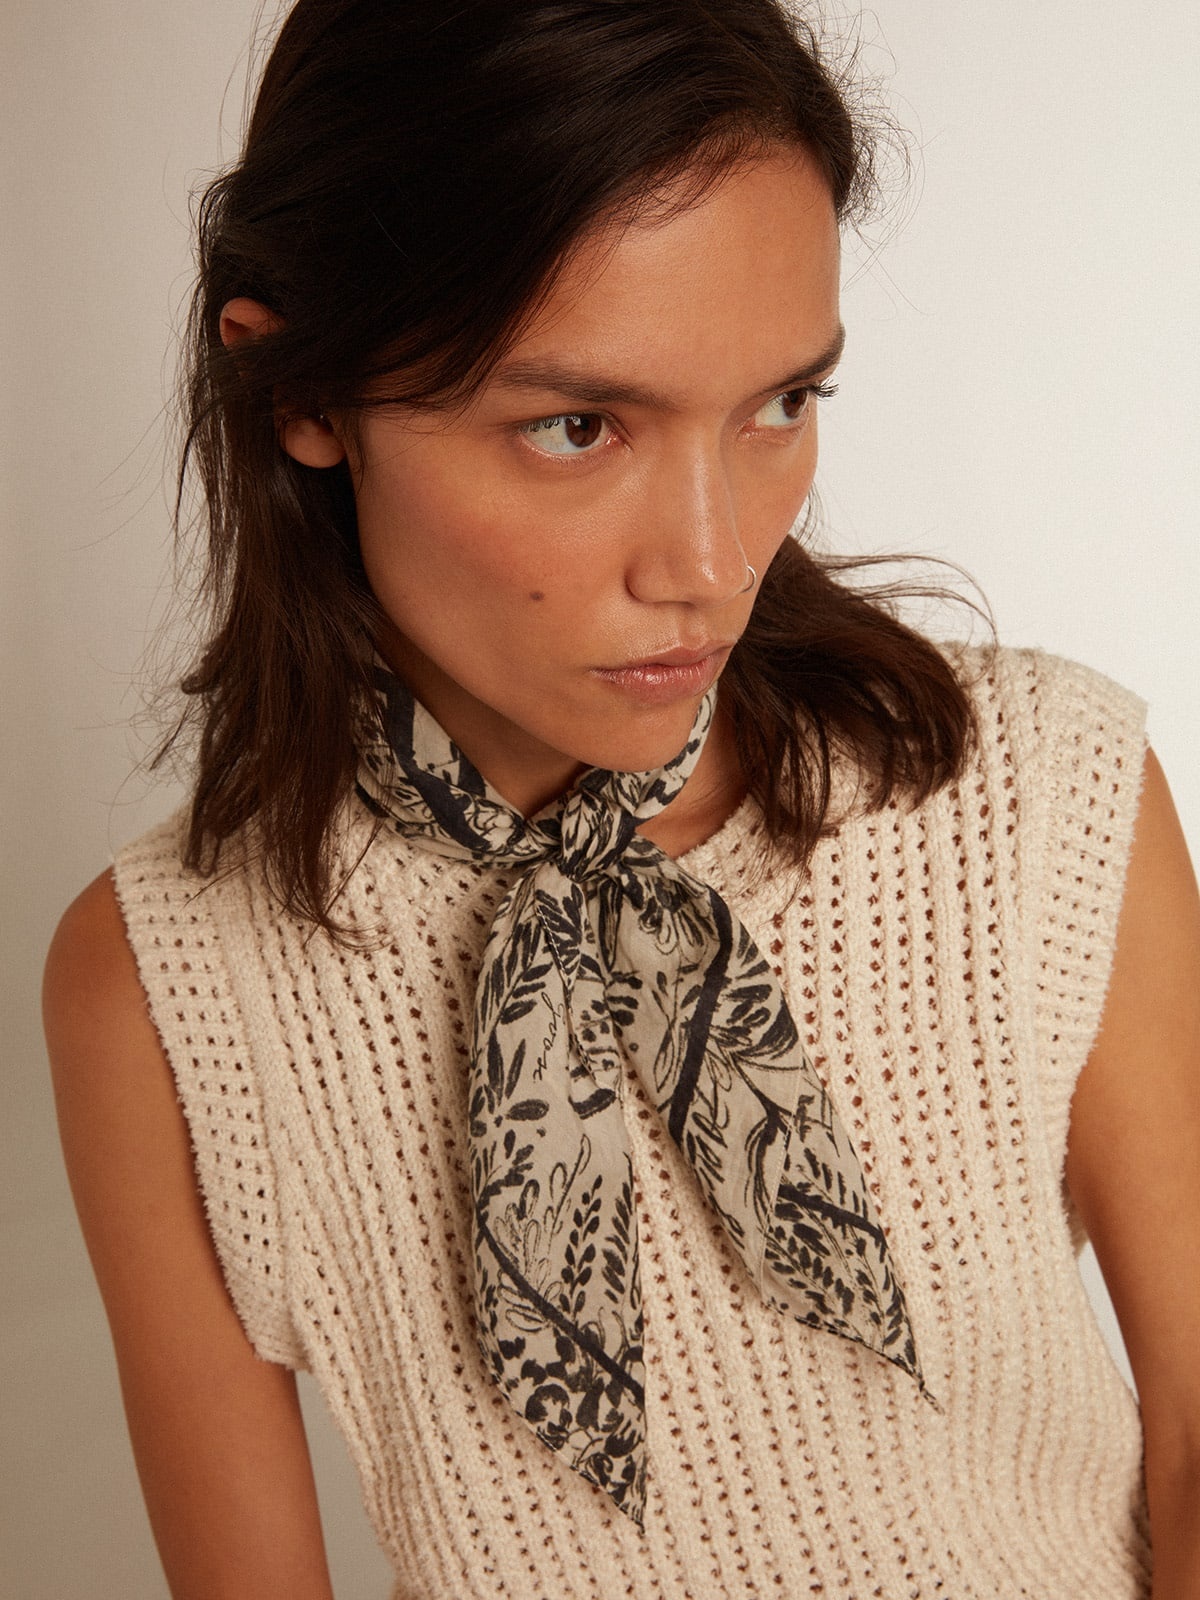 Bone-white scarf with contrasting toile de jouy pattern - 3